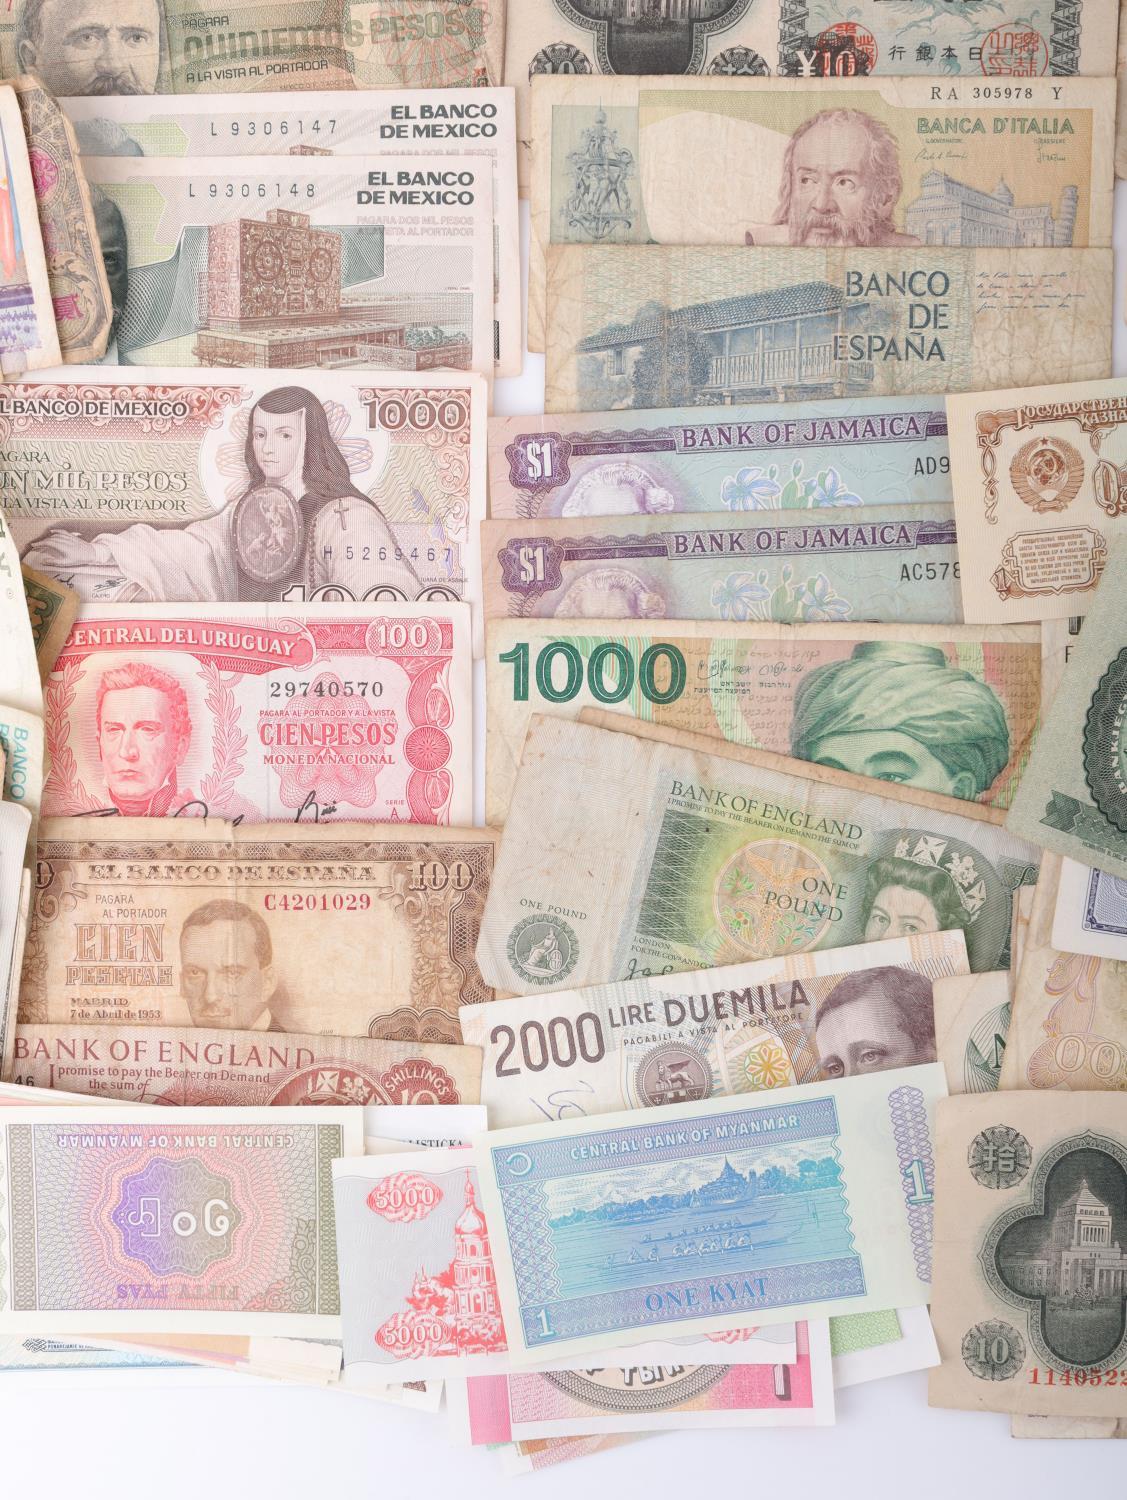 LARGE LOT OF CURRENCY FROM AROUND THE WORLD